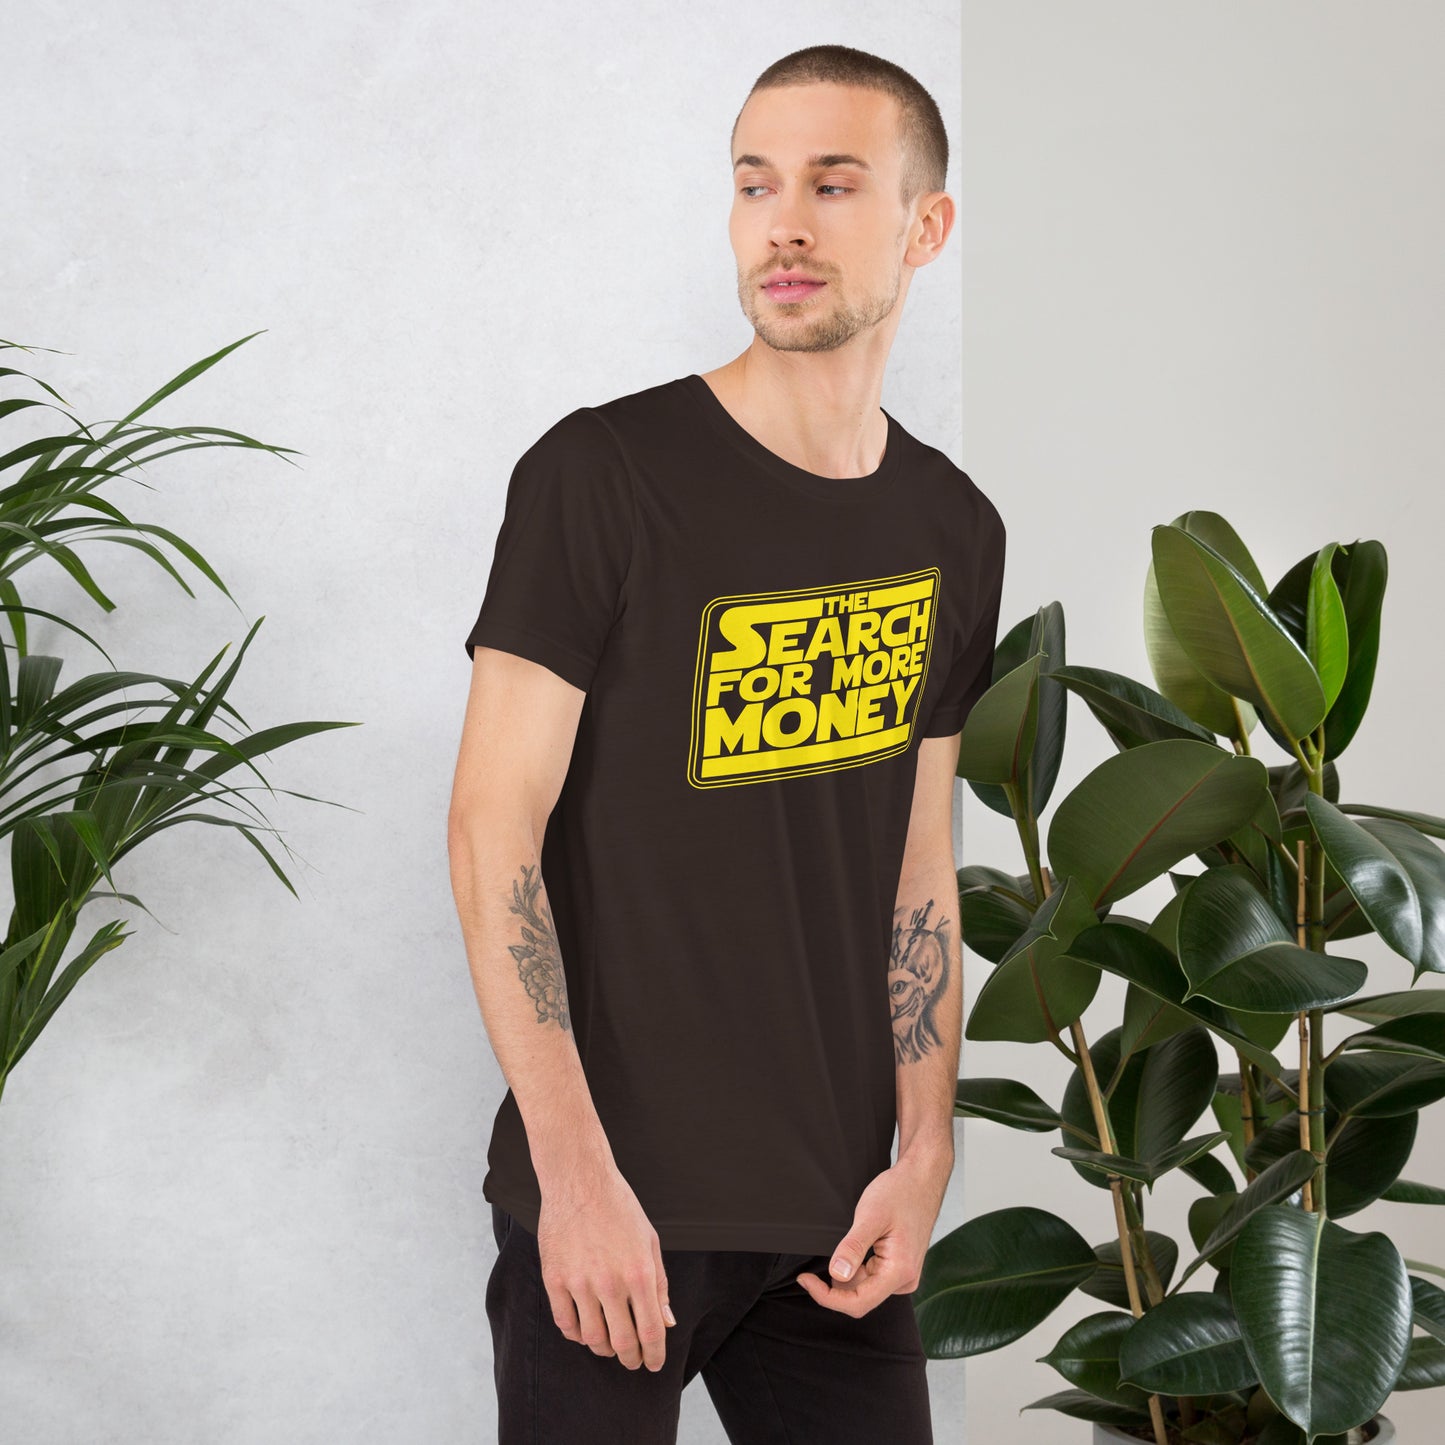 The Search For More Money Short-Sleeve Unisex T-Shirt Brown Mockup